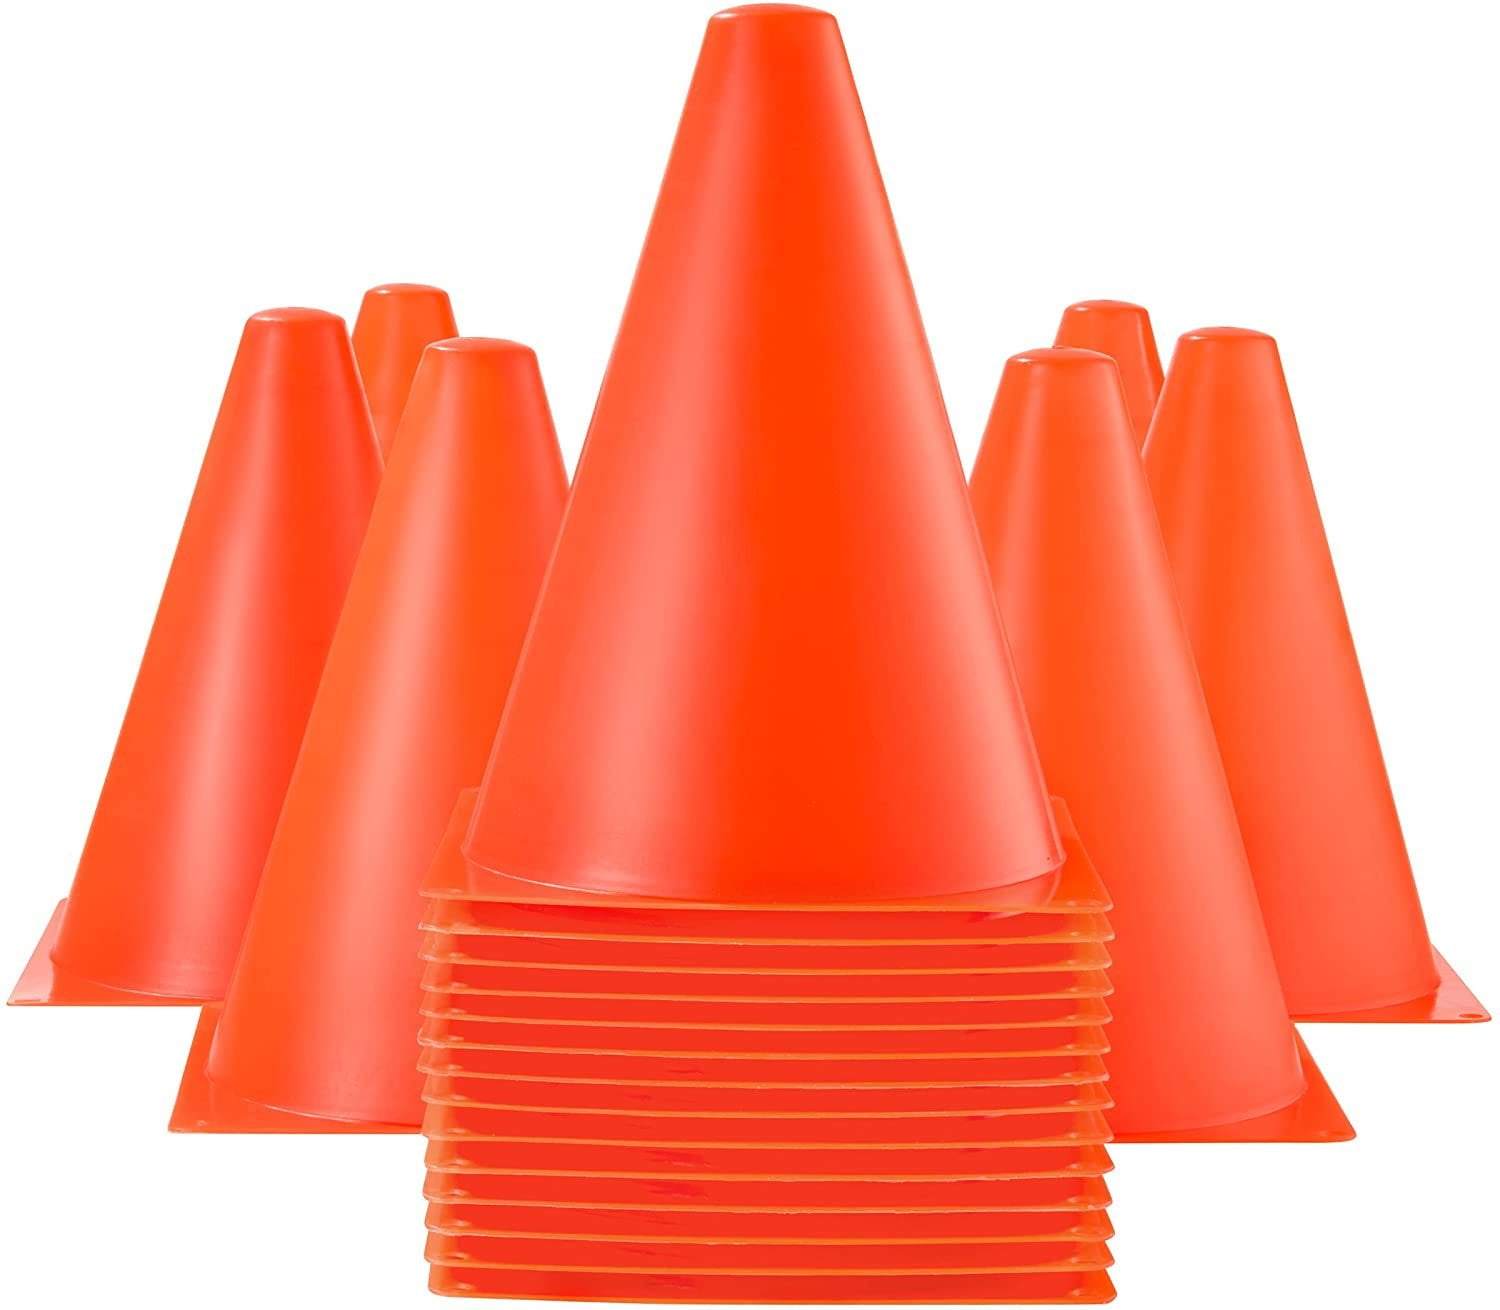 Mitre Training 9 inch Traffic Cones Set of 4 Football Soccer Pitch Marker 